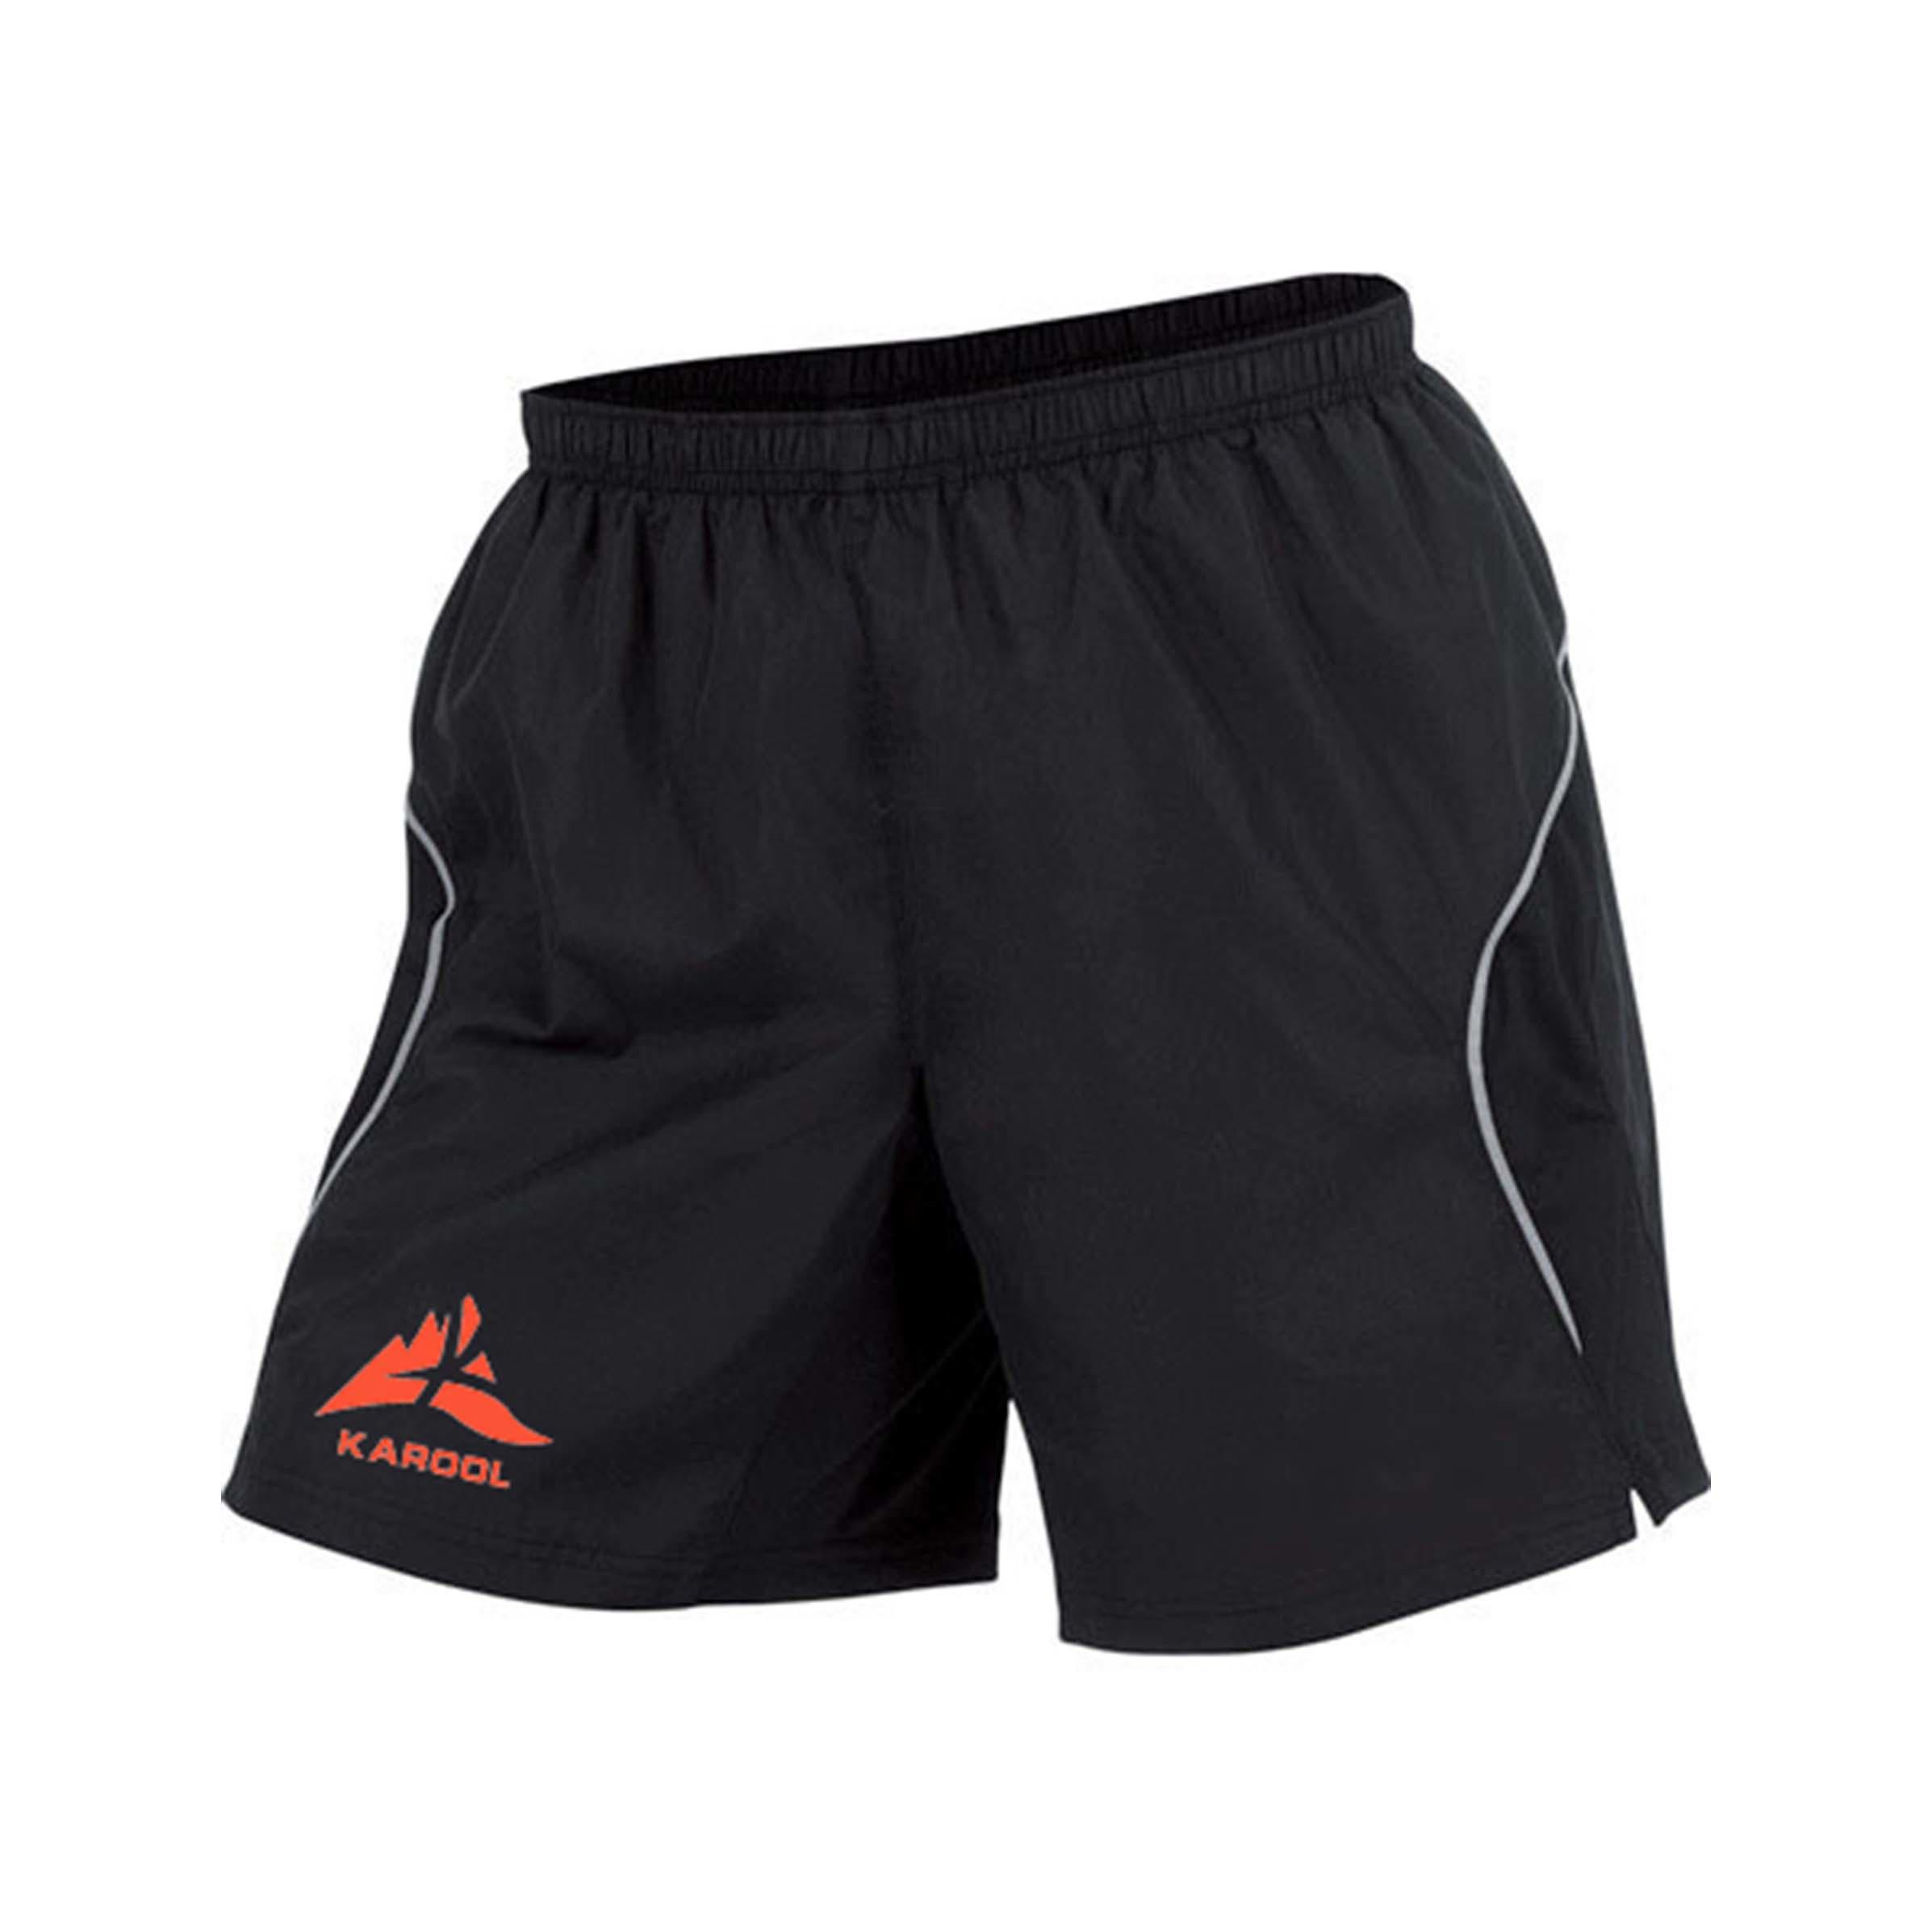 casual black running shorts supplier for sporting-1